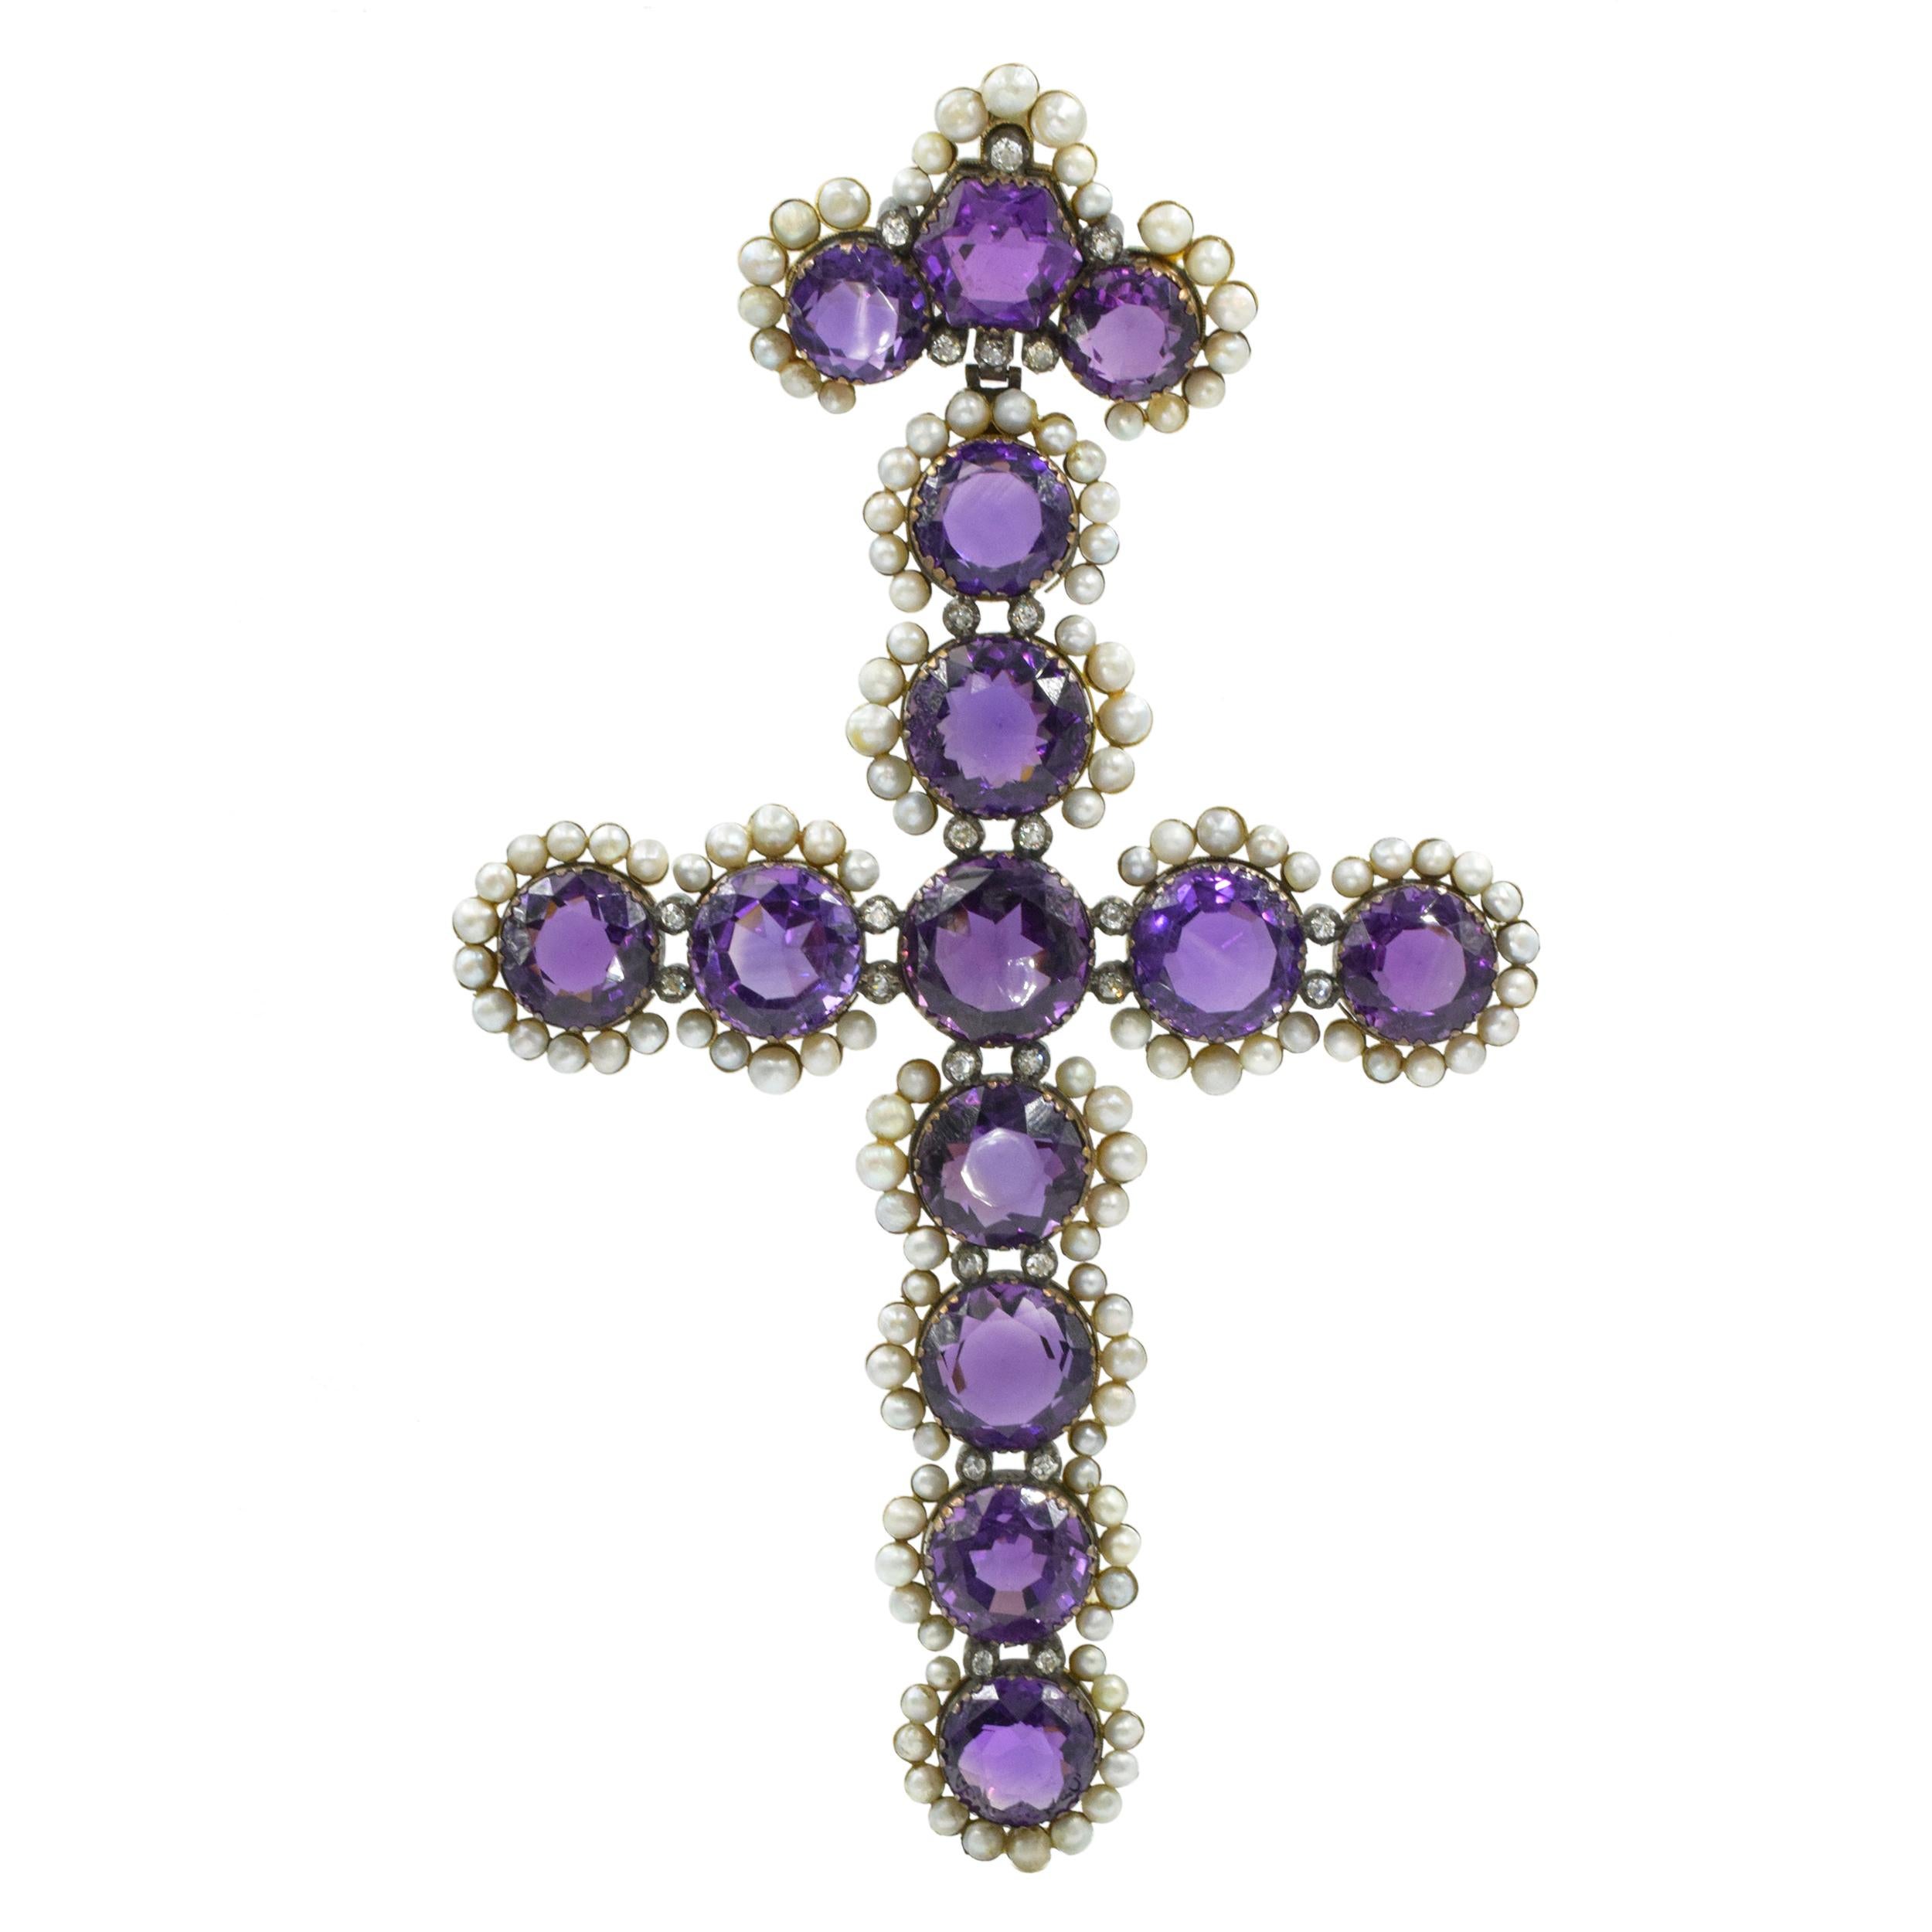 Antique Amethyst, Pearl, and Diamond Cross Pendant. This cross pendant has round amethysts, pearls, and 26 old-cut diamonds weighing approximately 1.75 carats  all set in silver and yellow gold. Circa mid to late 19th century. Dimensions: 19.0 x